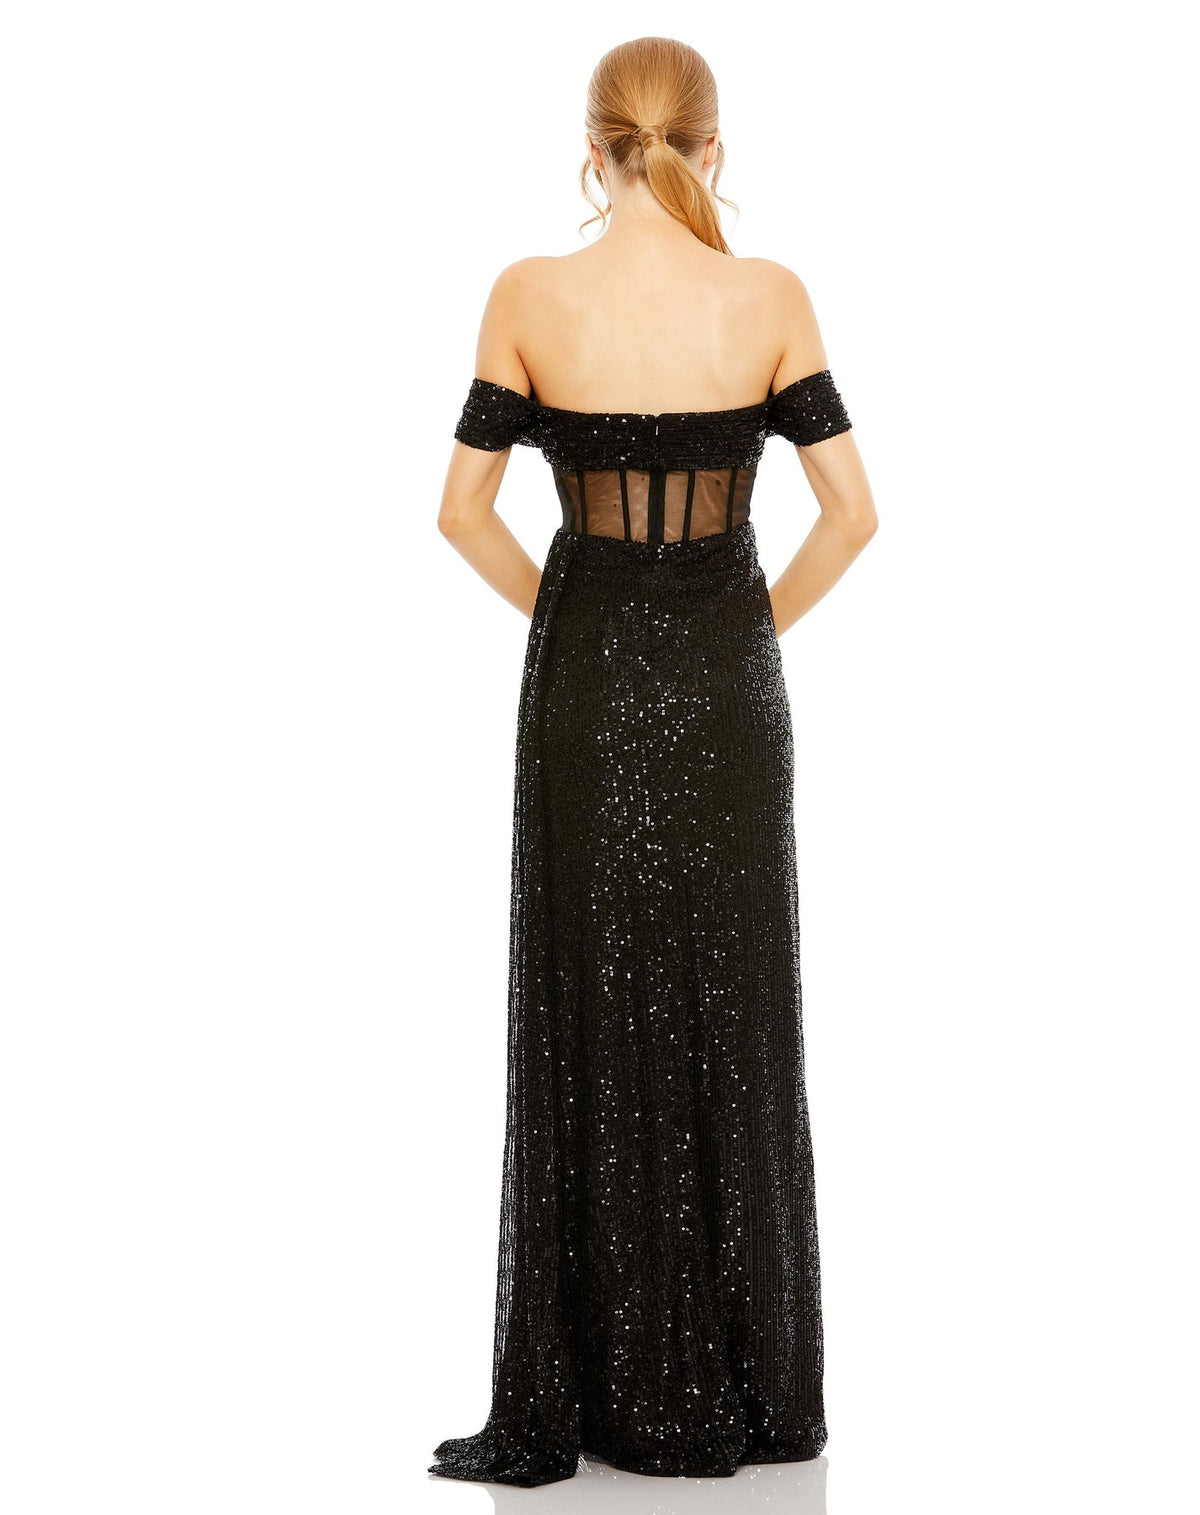 SEQUINED GOWN WITH SHEER CORSET WAIST AND SLIT black sequin back